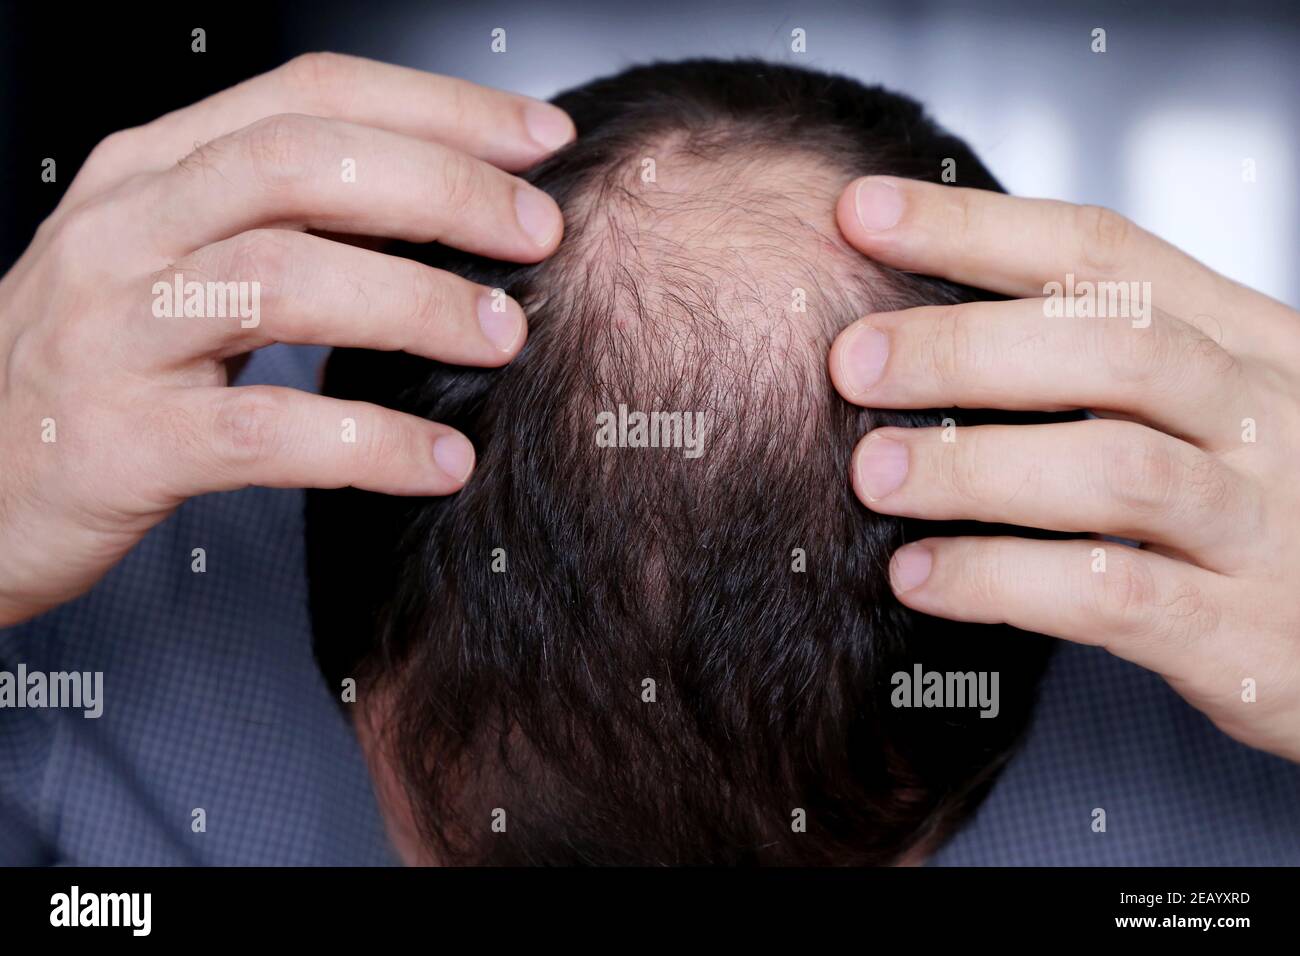 Baldness, man concerned about hair loss. Male head with a bald Stock Photo